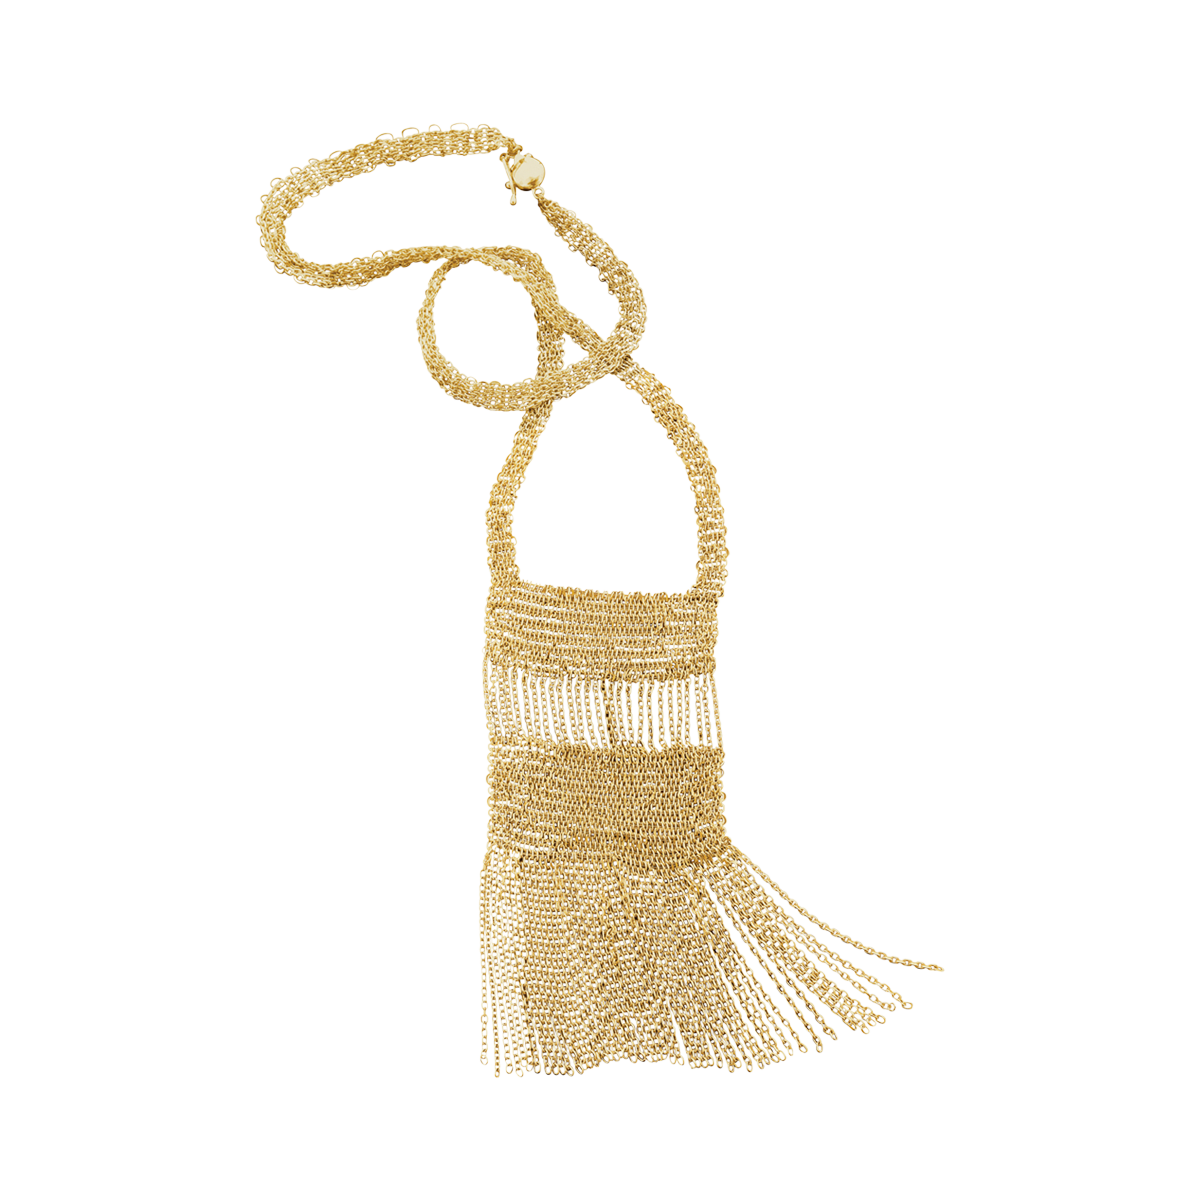 Woven Chain Fringe Necklace in 18 karat yellow gold by Solange Azagury-Partridge